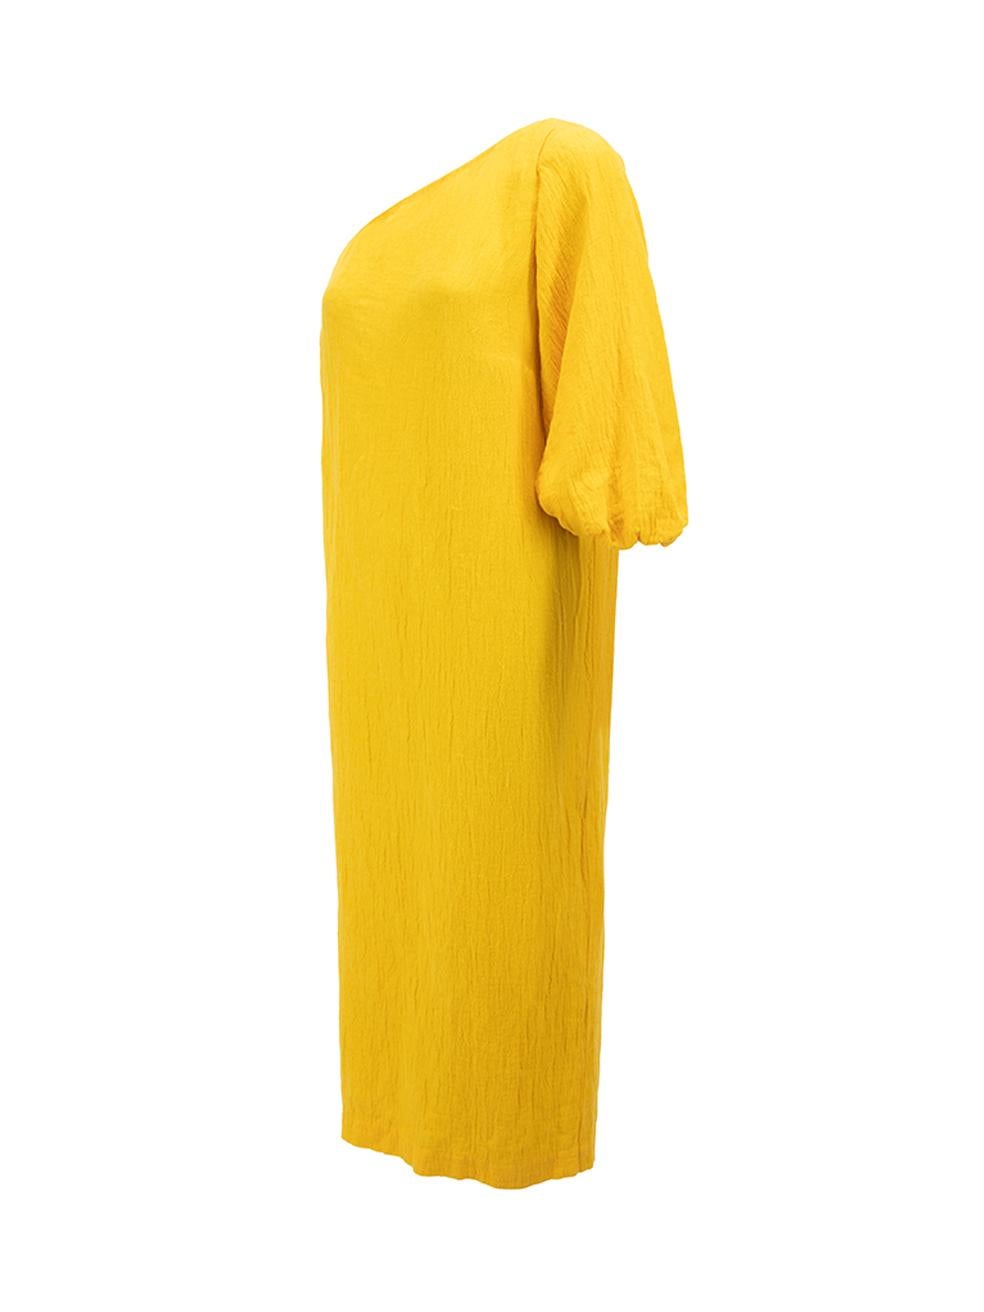 Mara Hoffman Women's Yellow Asymmetric One Sleeve Dress In Good Condition For Sale In London, GB